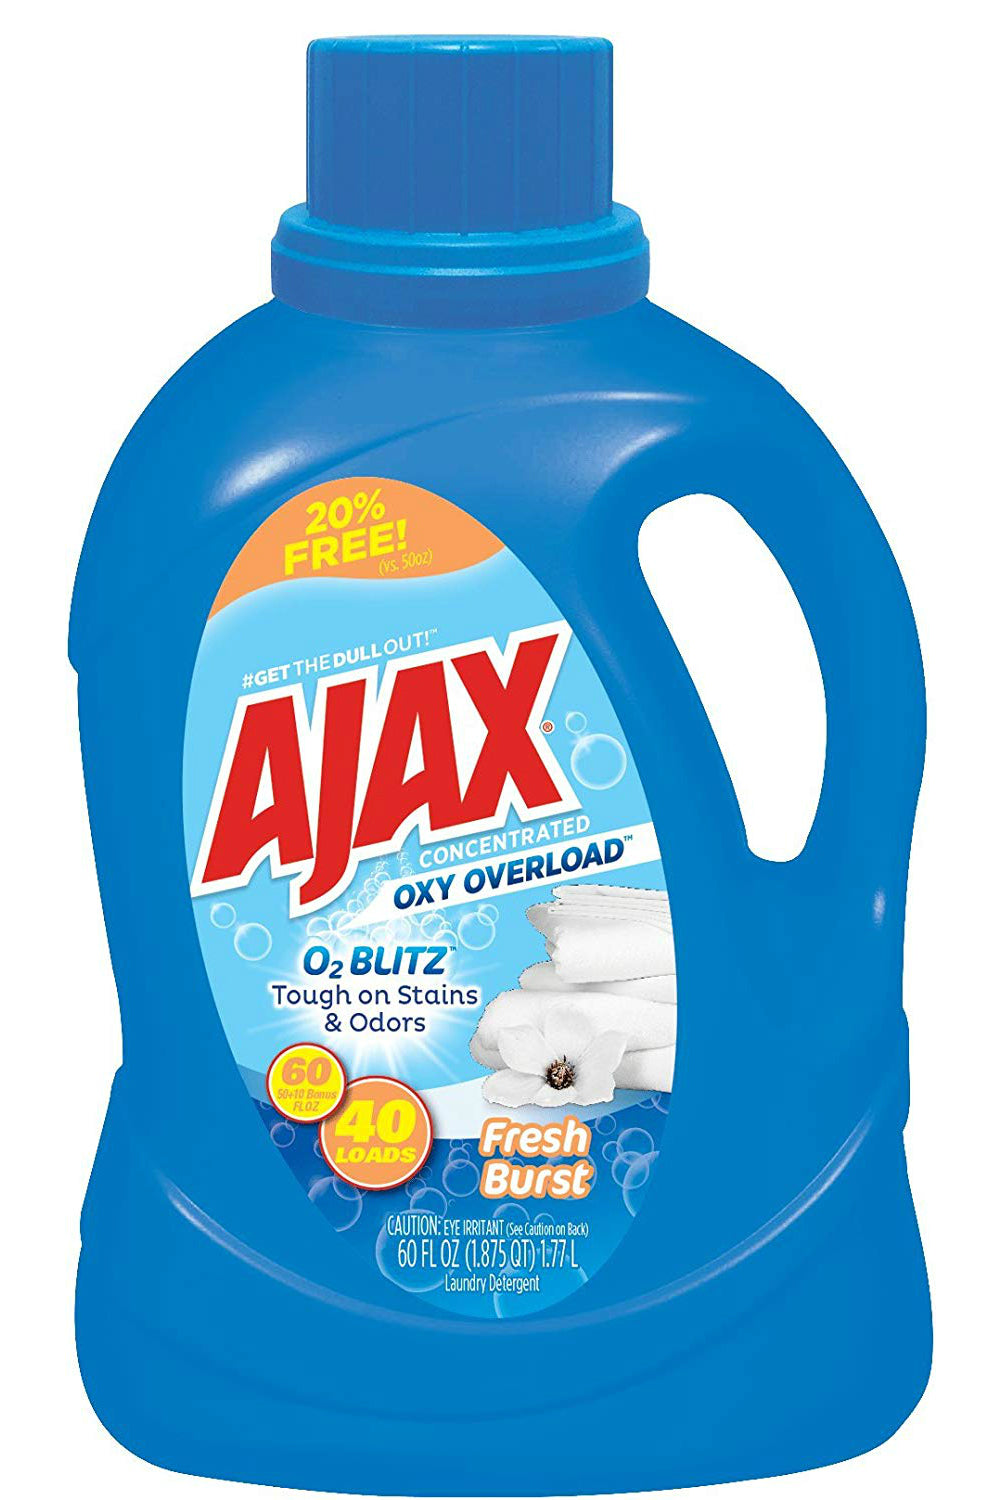 Buy ajax oxy overload - Online store for chemicals & cleaners, laundry in USA, on sale, low price, discount deals, coupon code